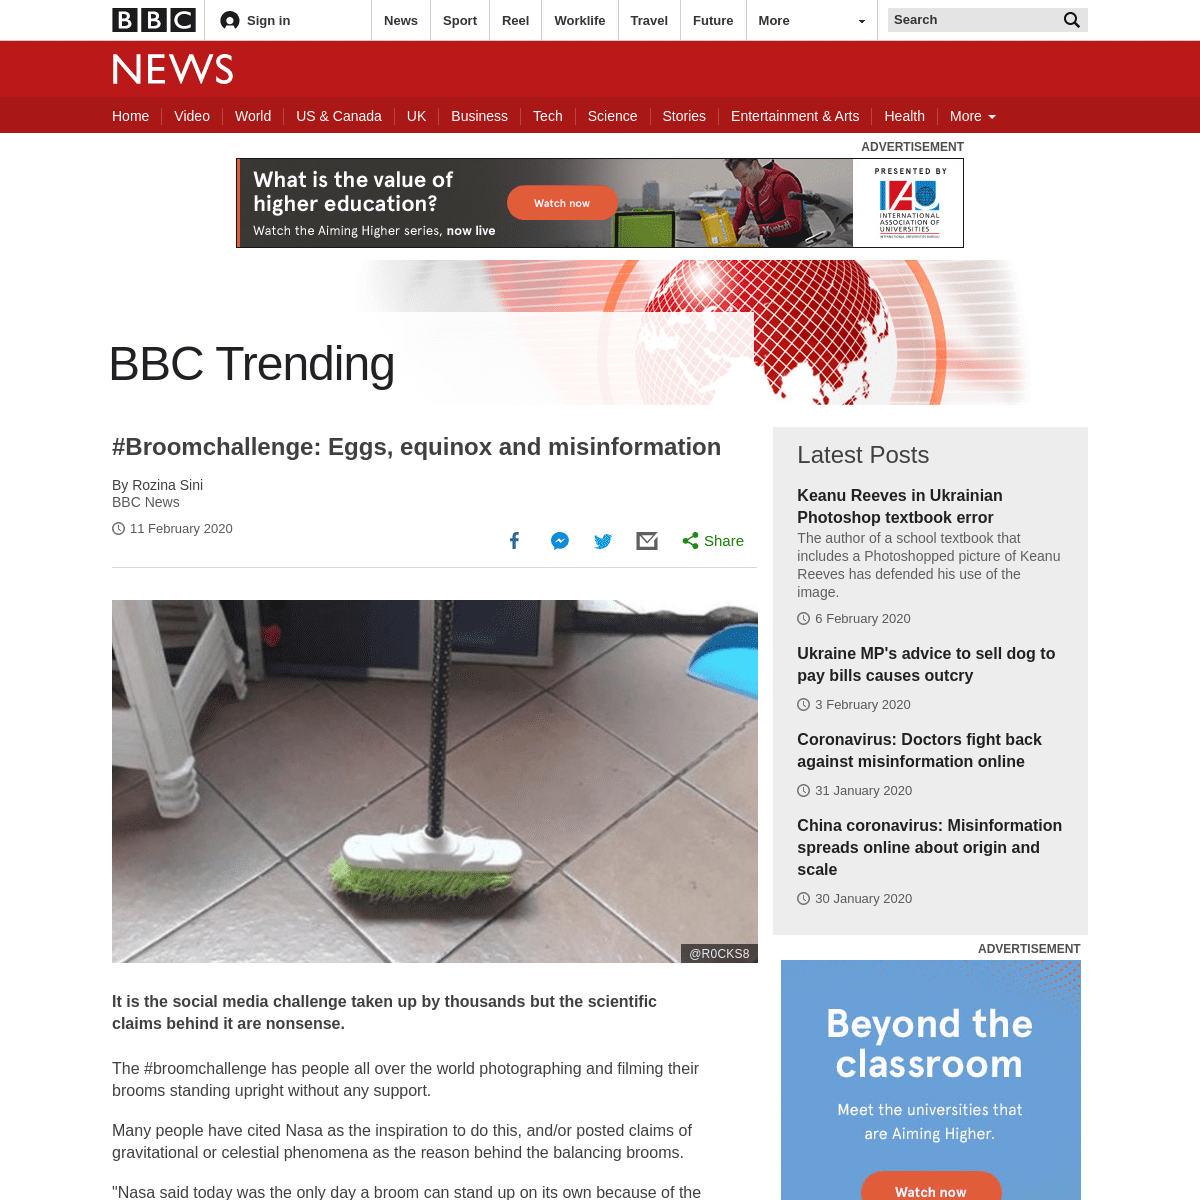 A complete backup of www.bbc.com/news/blogs-trending-51444916